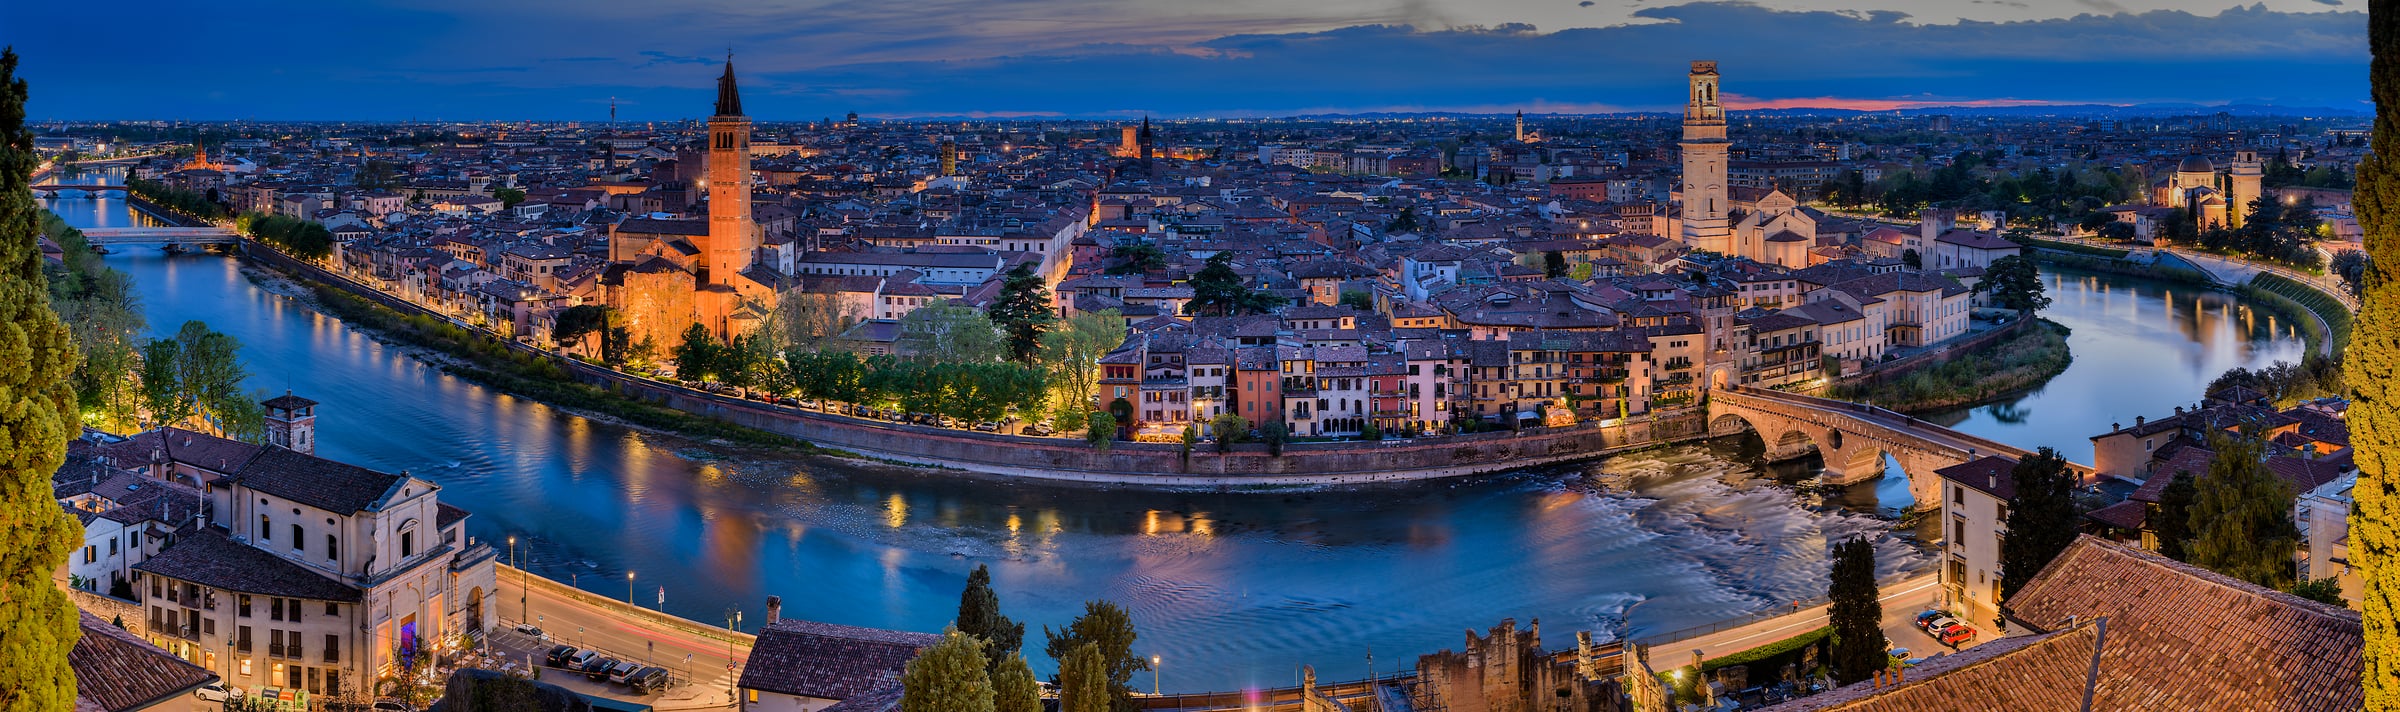 640 megapixels! A very high resolution, panorama photo of Verona, Italy at dusk with the Adige River and scenic landmarks; cityscape photograph created by Alfred Feil in Ponte Pietro, Verona, Veneto, Italy.